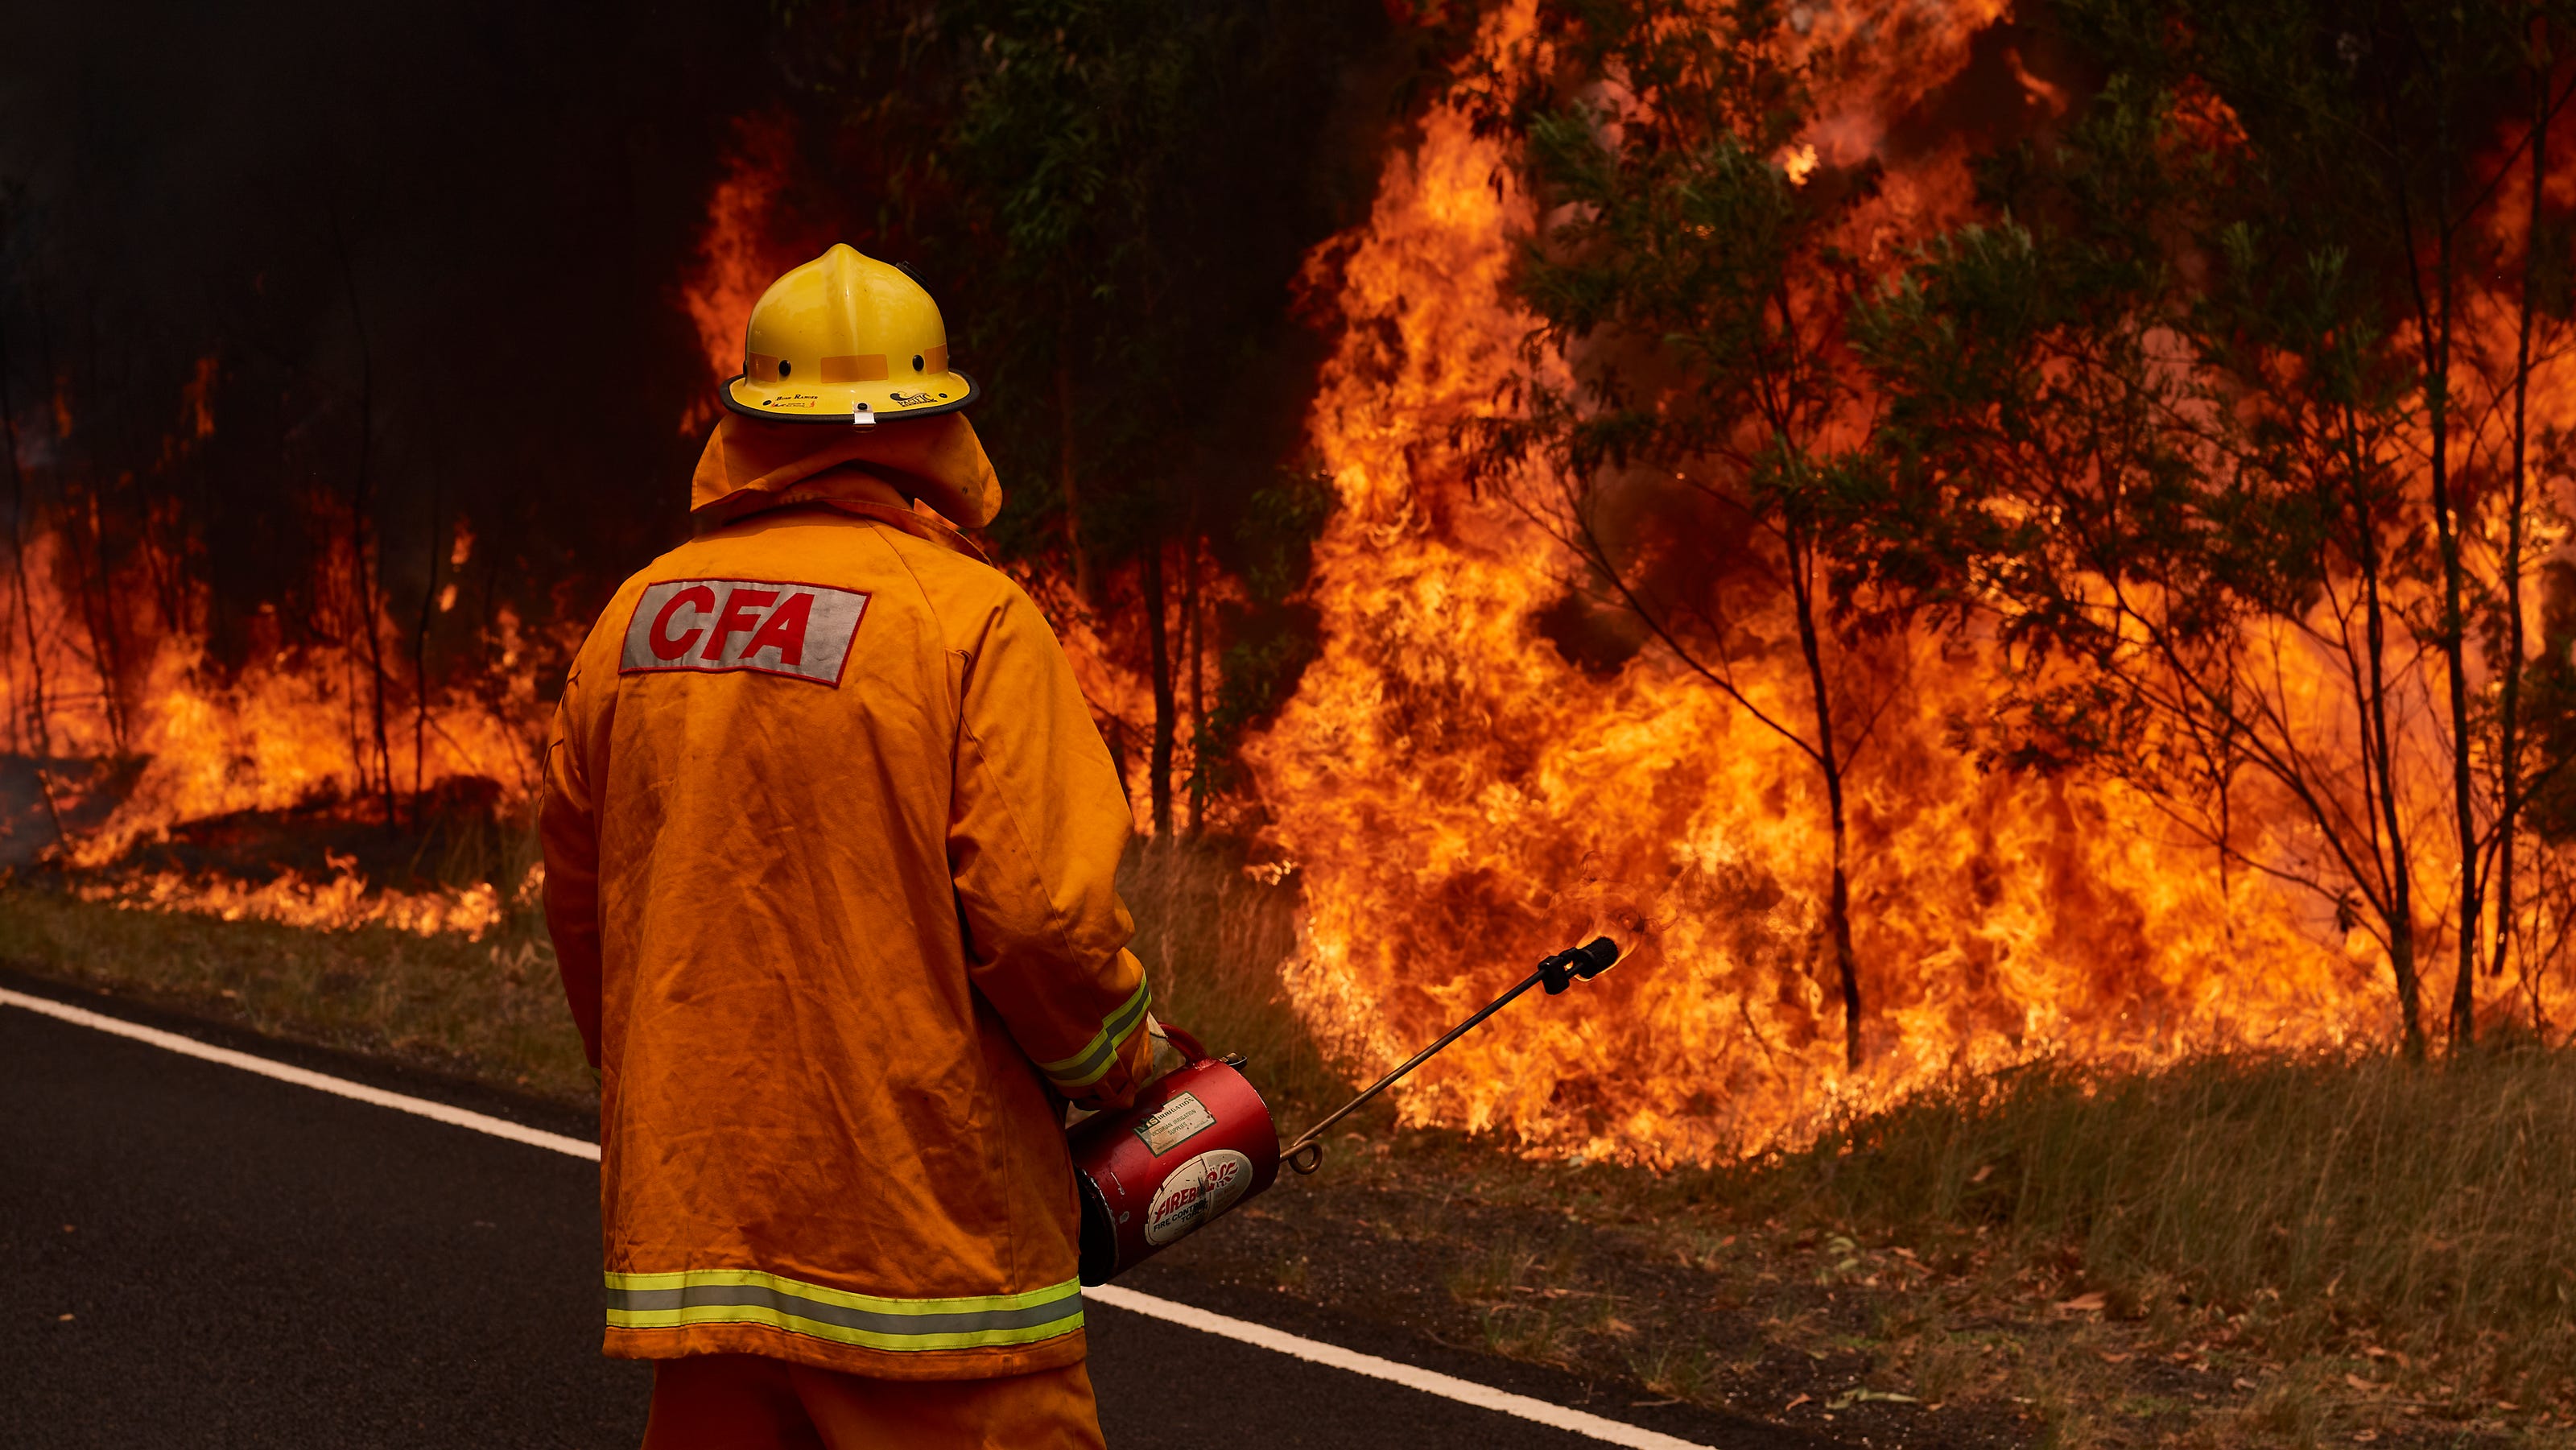 Australia's bushfire season begins early and forcefully as its politicians differ over climate change - USA TODAY